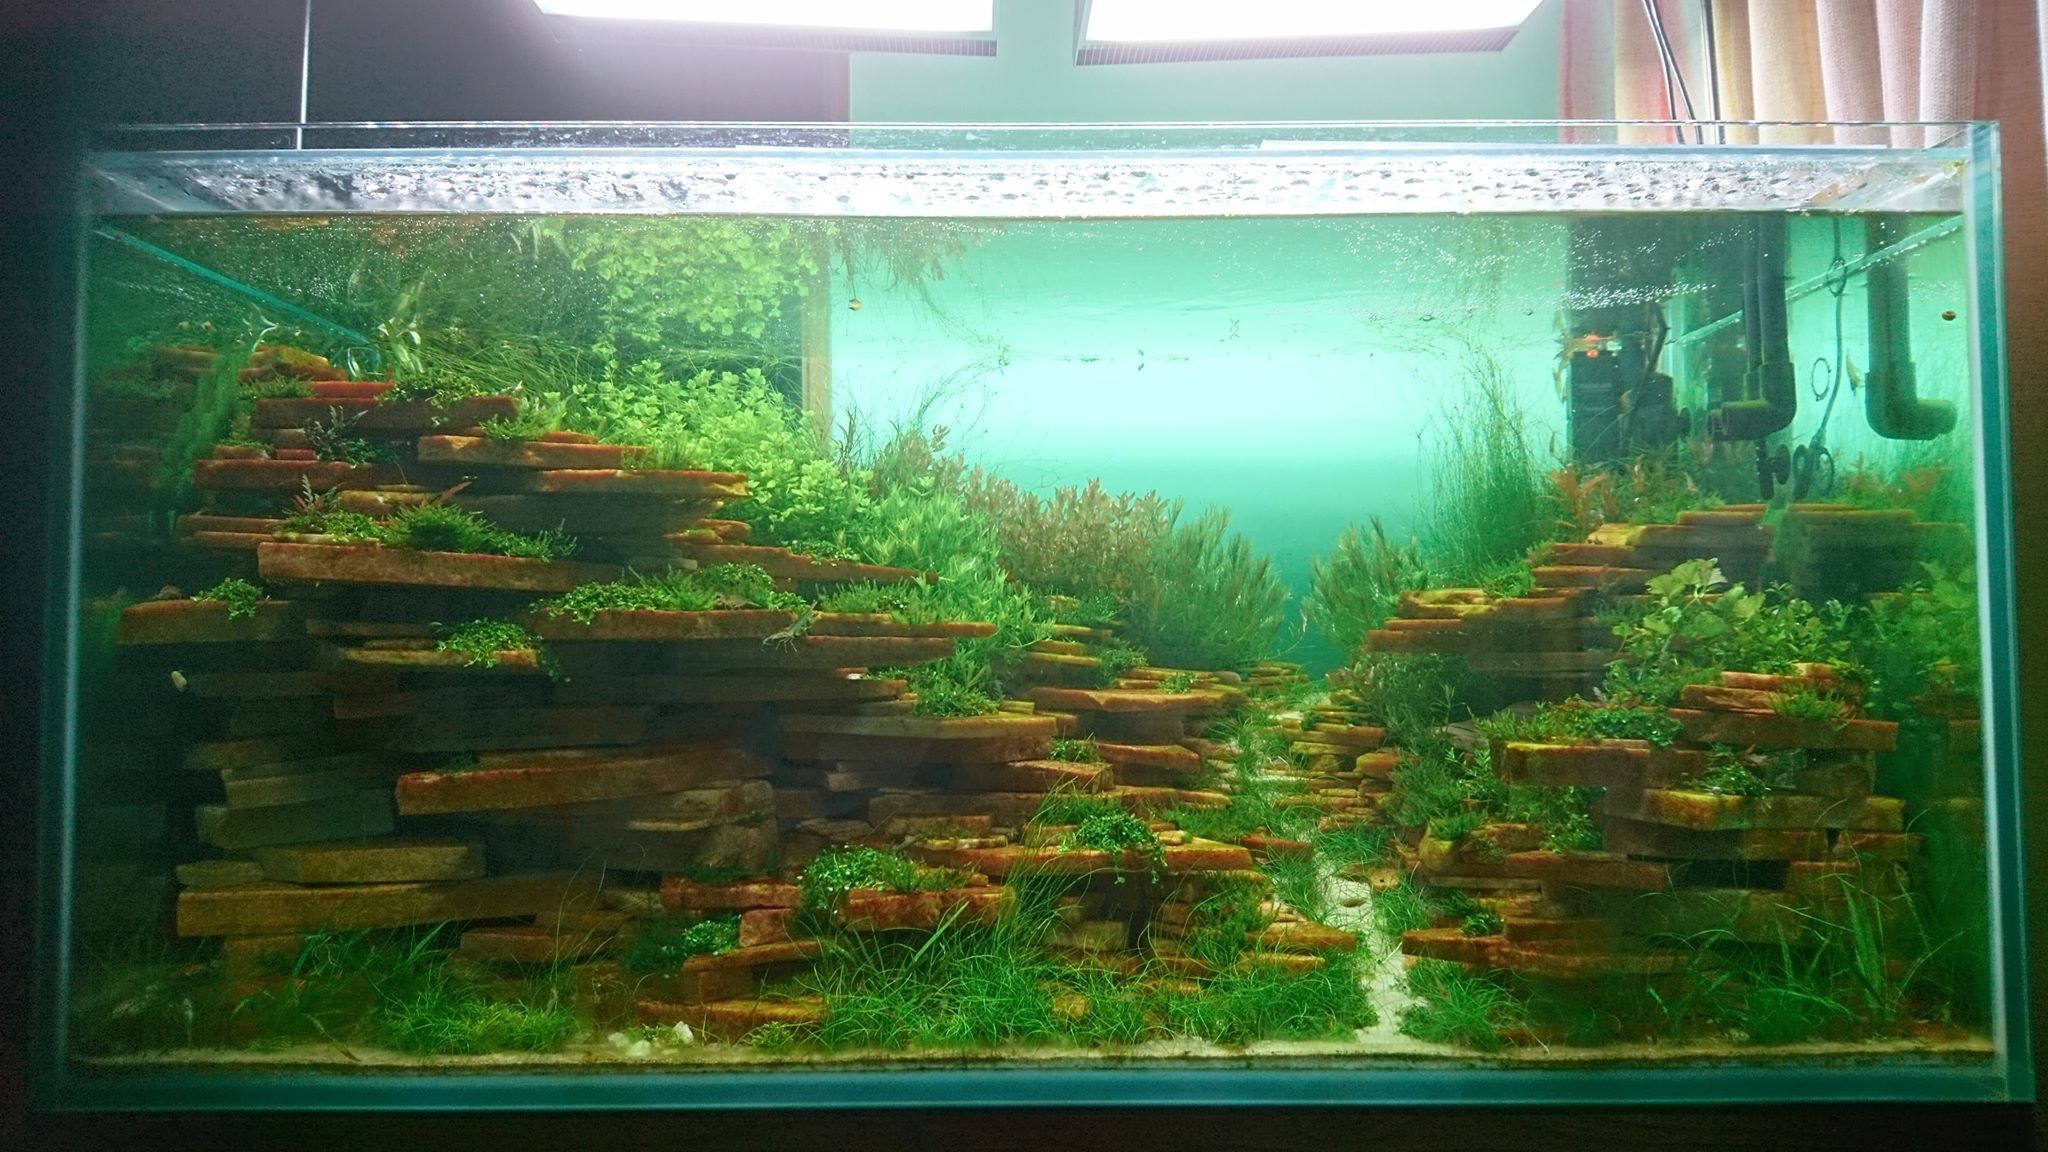 How to make an aquatic plant aquarium ranked 27th in the world - IAPLC 2018 - Place of fascinatin